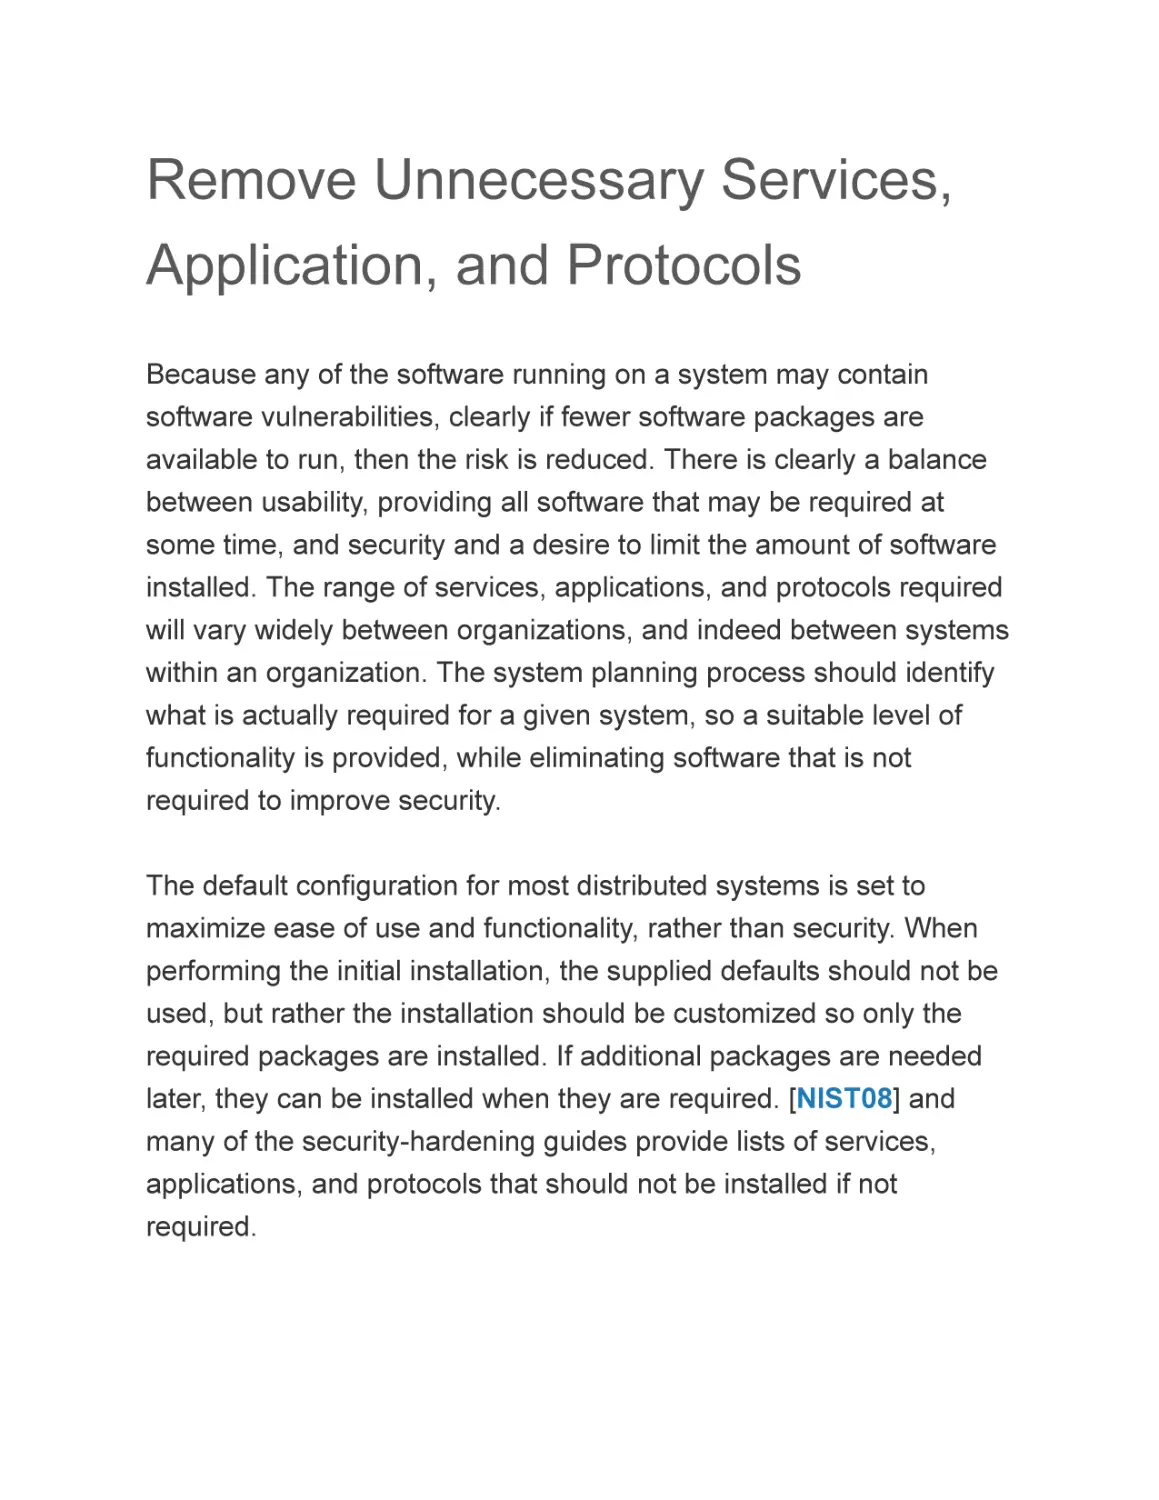 Remove Unnecessary Services, Application, and Protocols